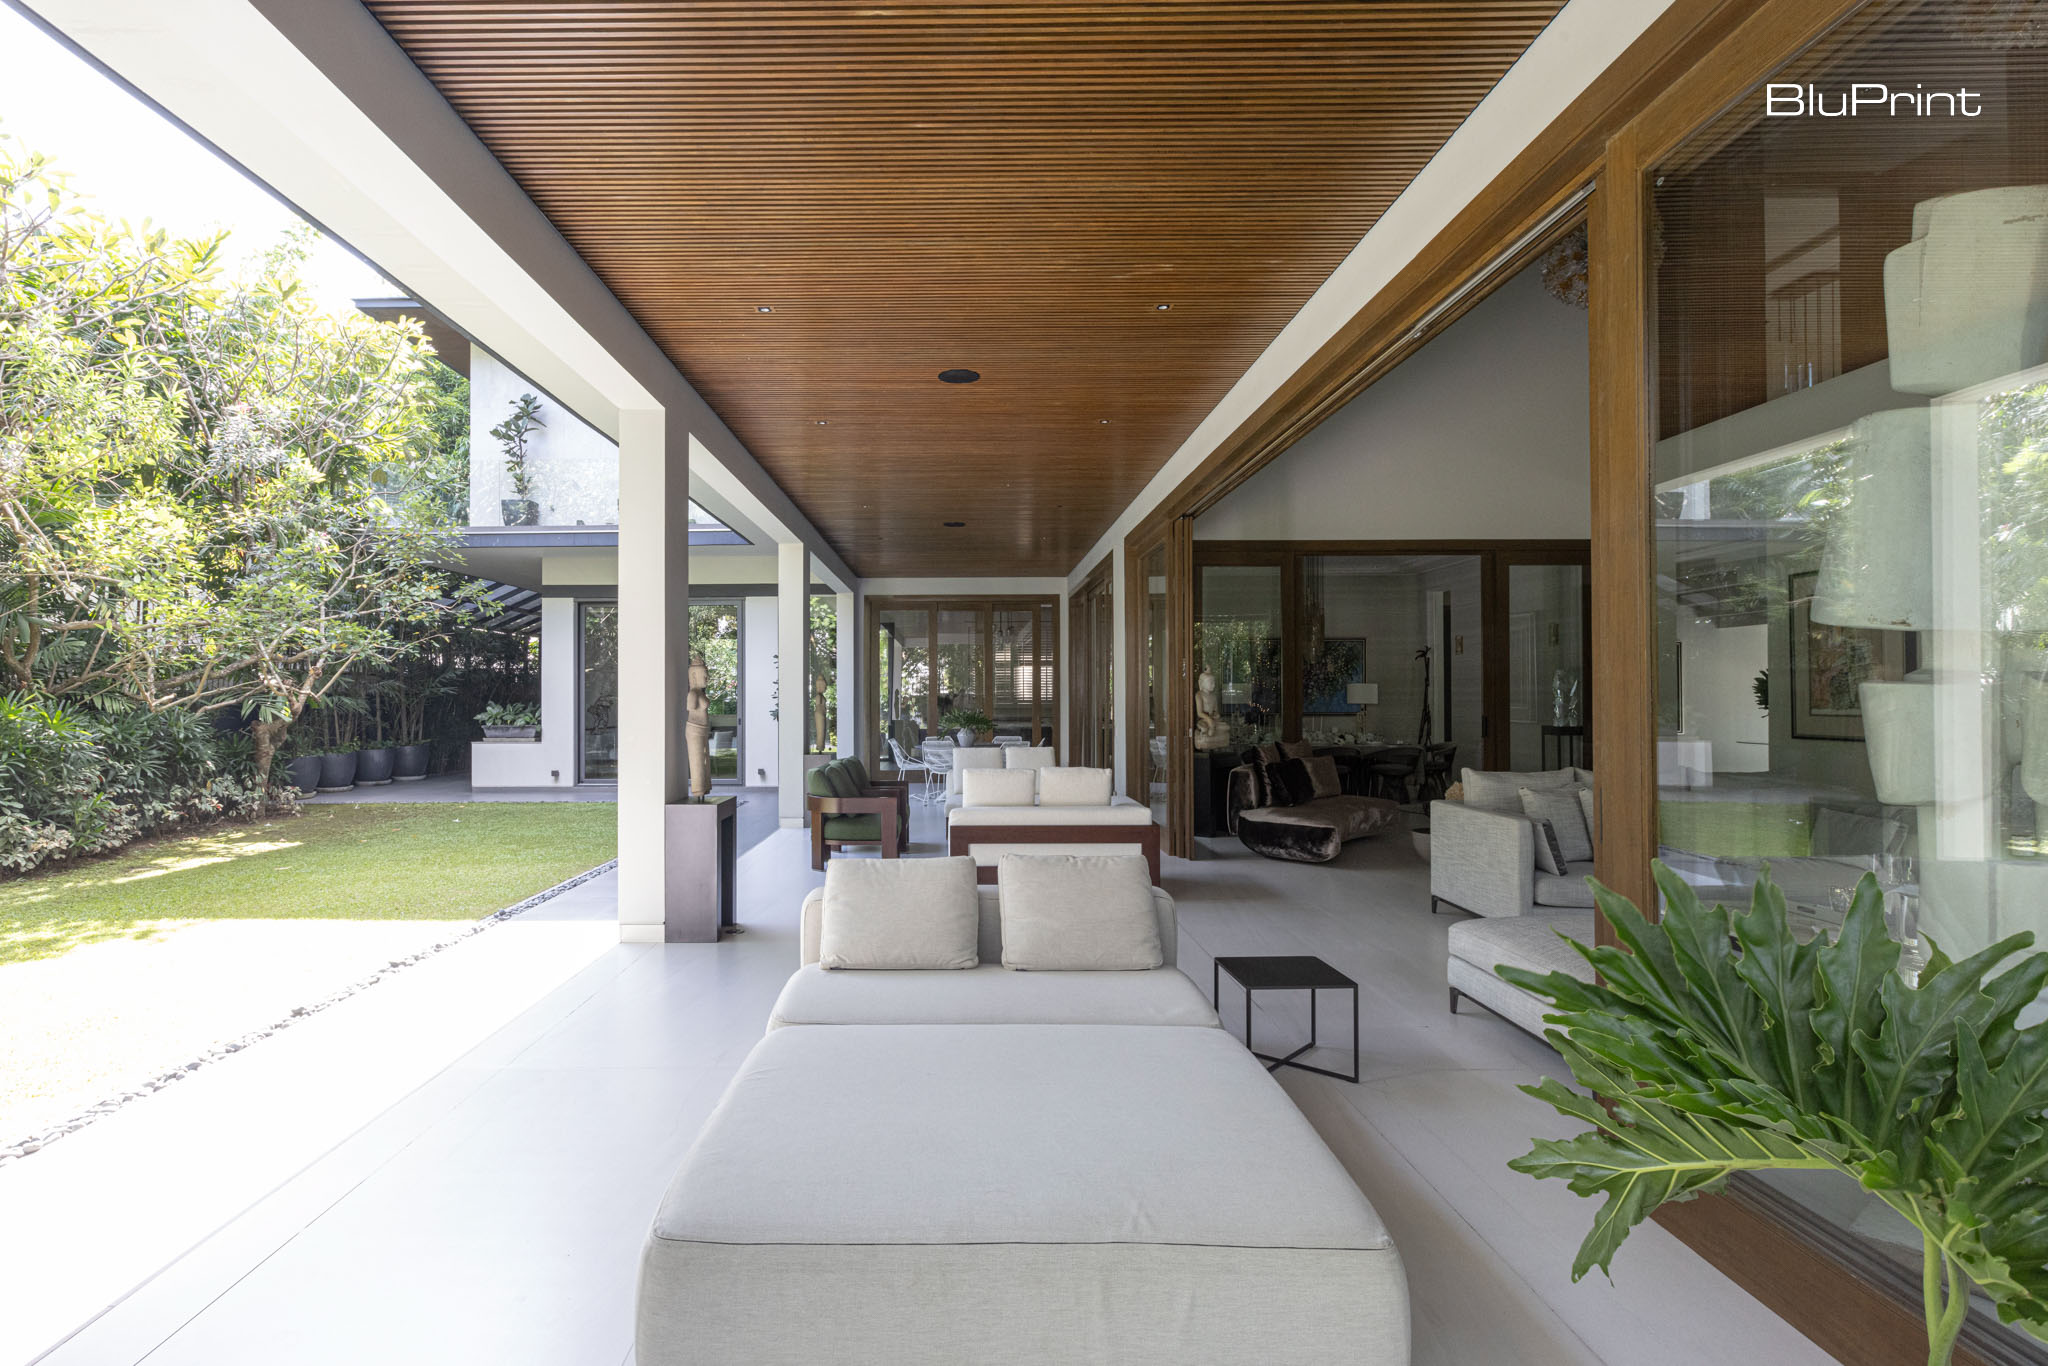 Outdoor space seamlessly blends with the inside living area